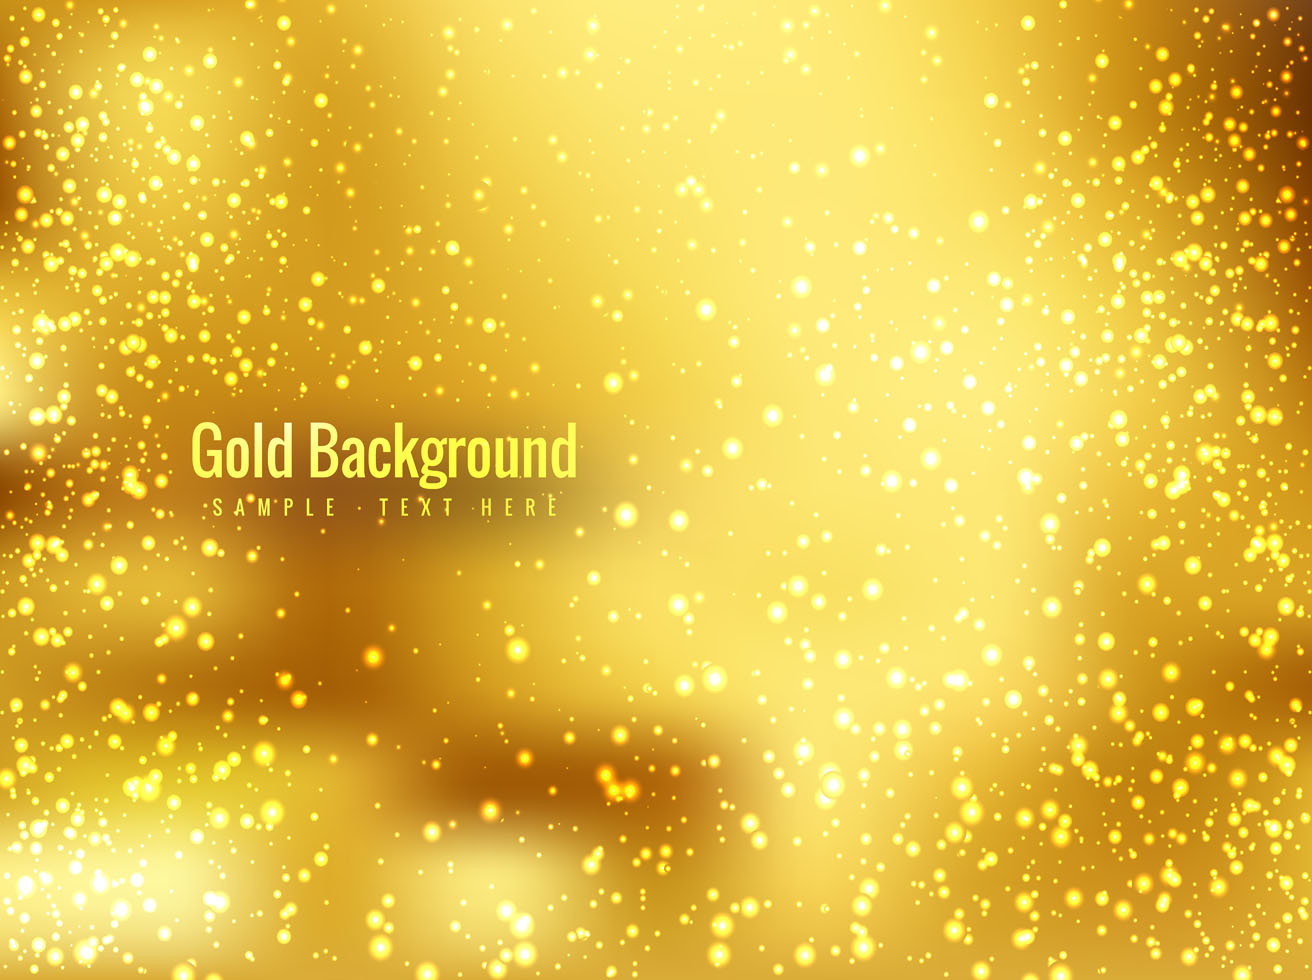 Free Vector Shiny Gold Background